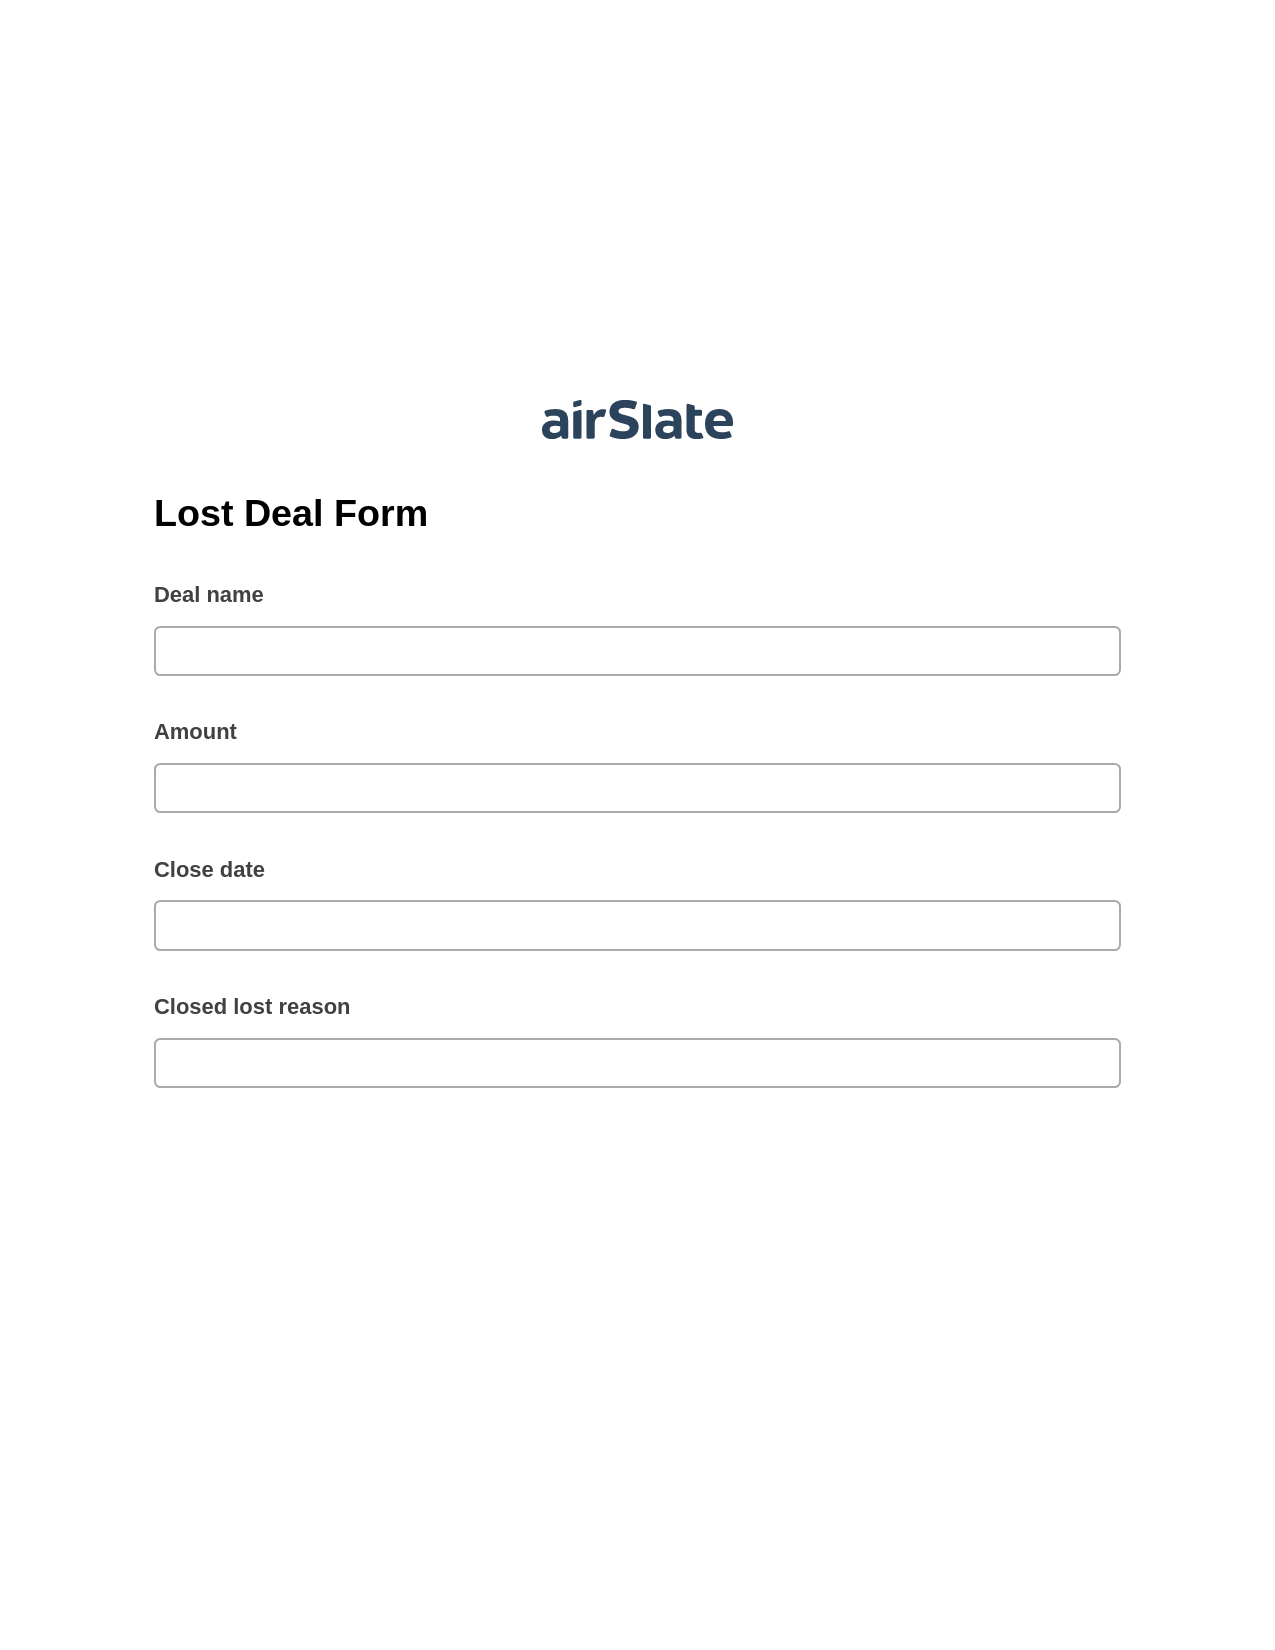 Lost Deal Form Pre-fill from Salesforce Records Bot, Update Salesforce Records Bot, Archive to Box Bot